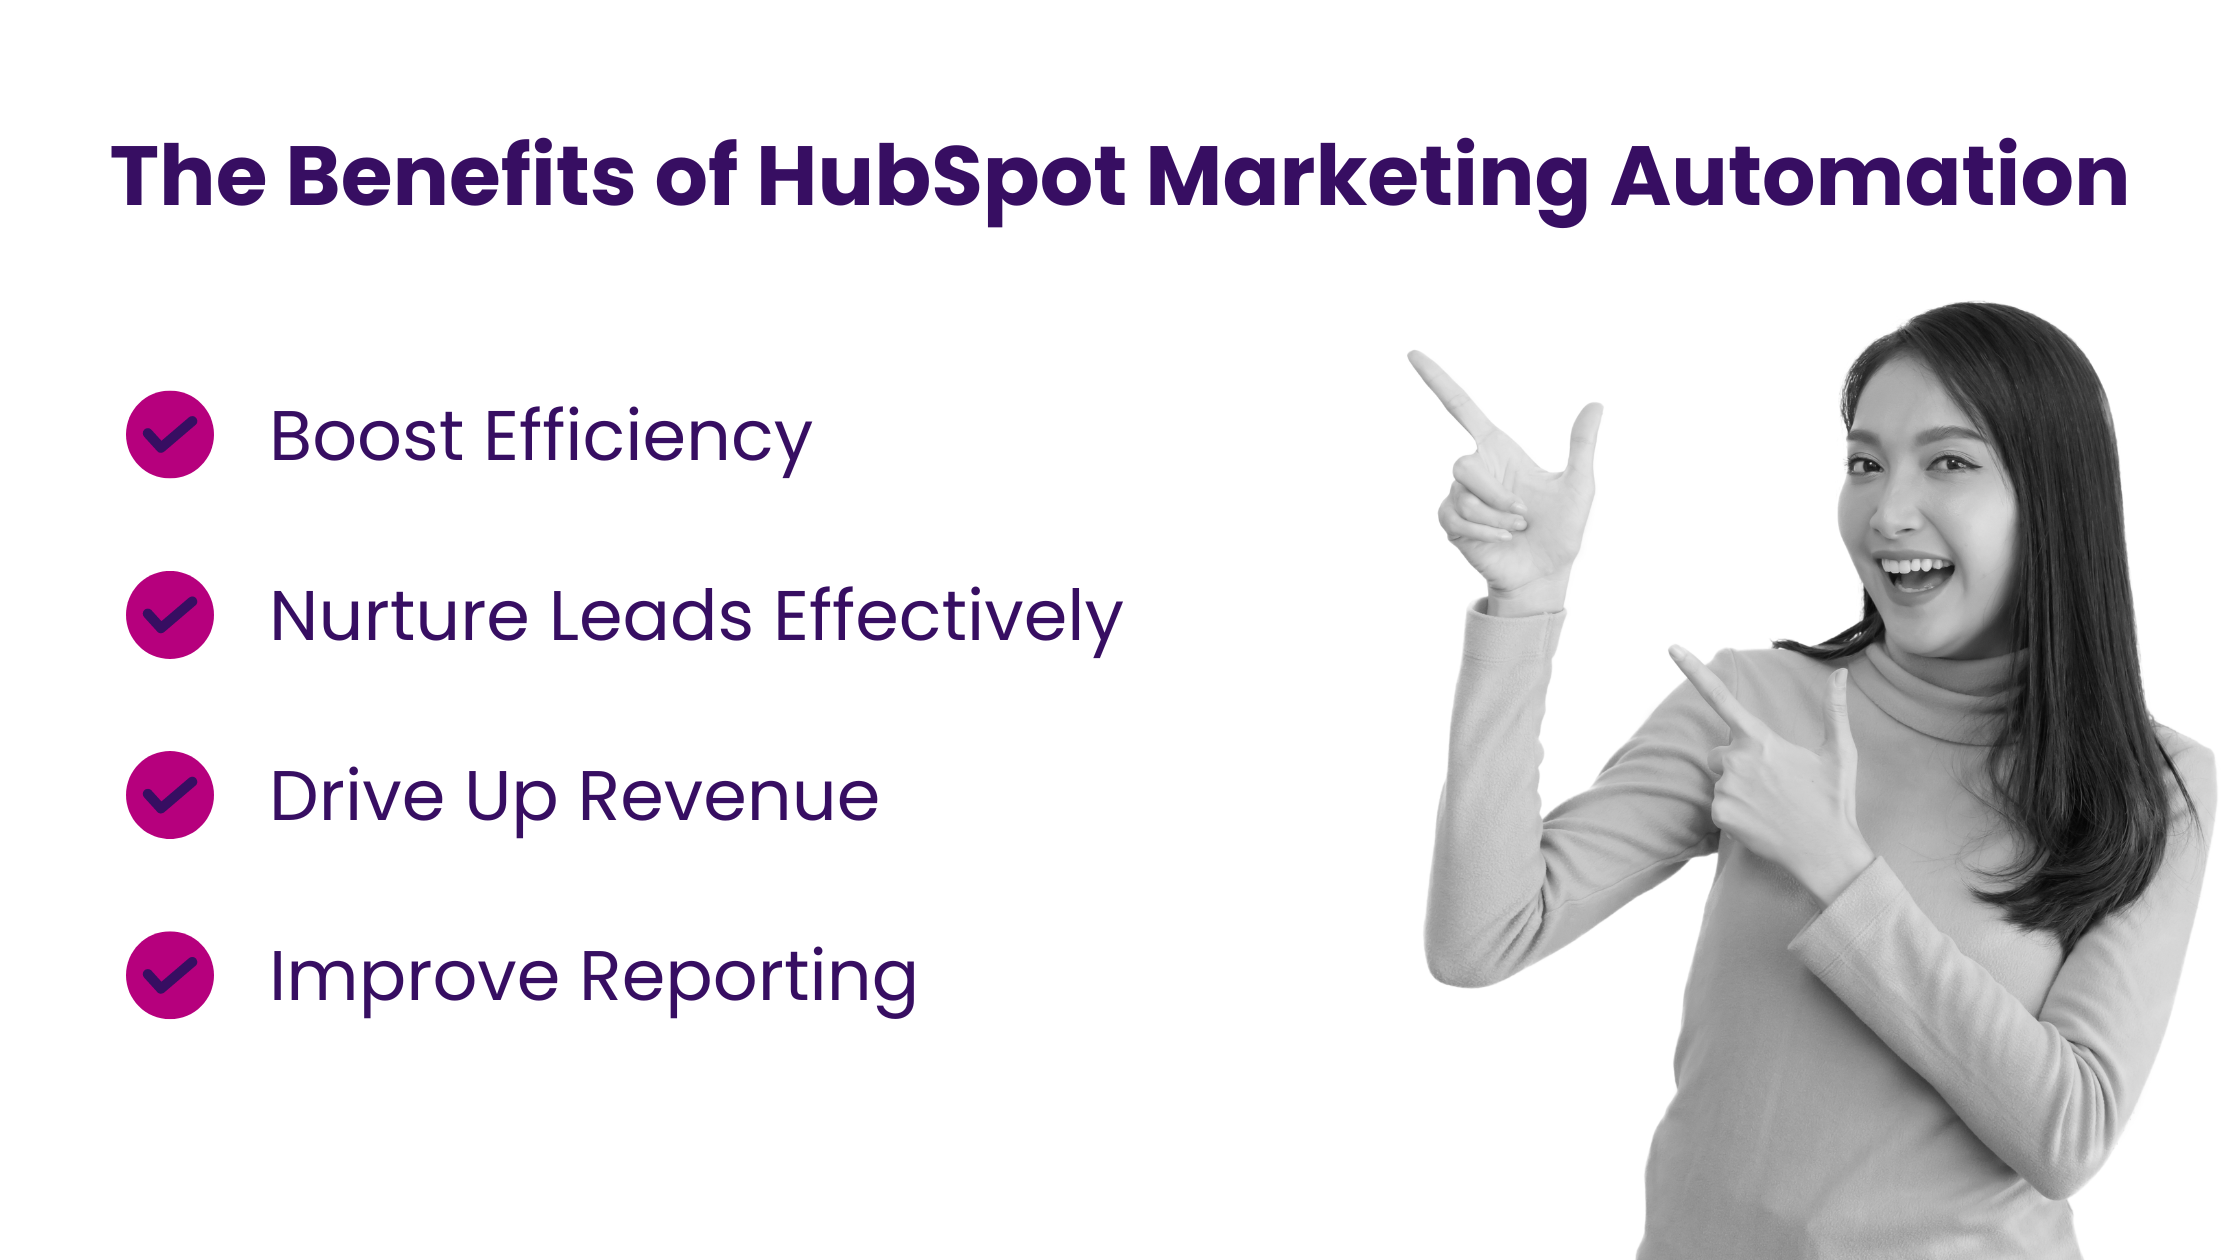 The Benefits of HubSpot Marketing Automation